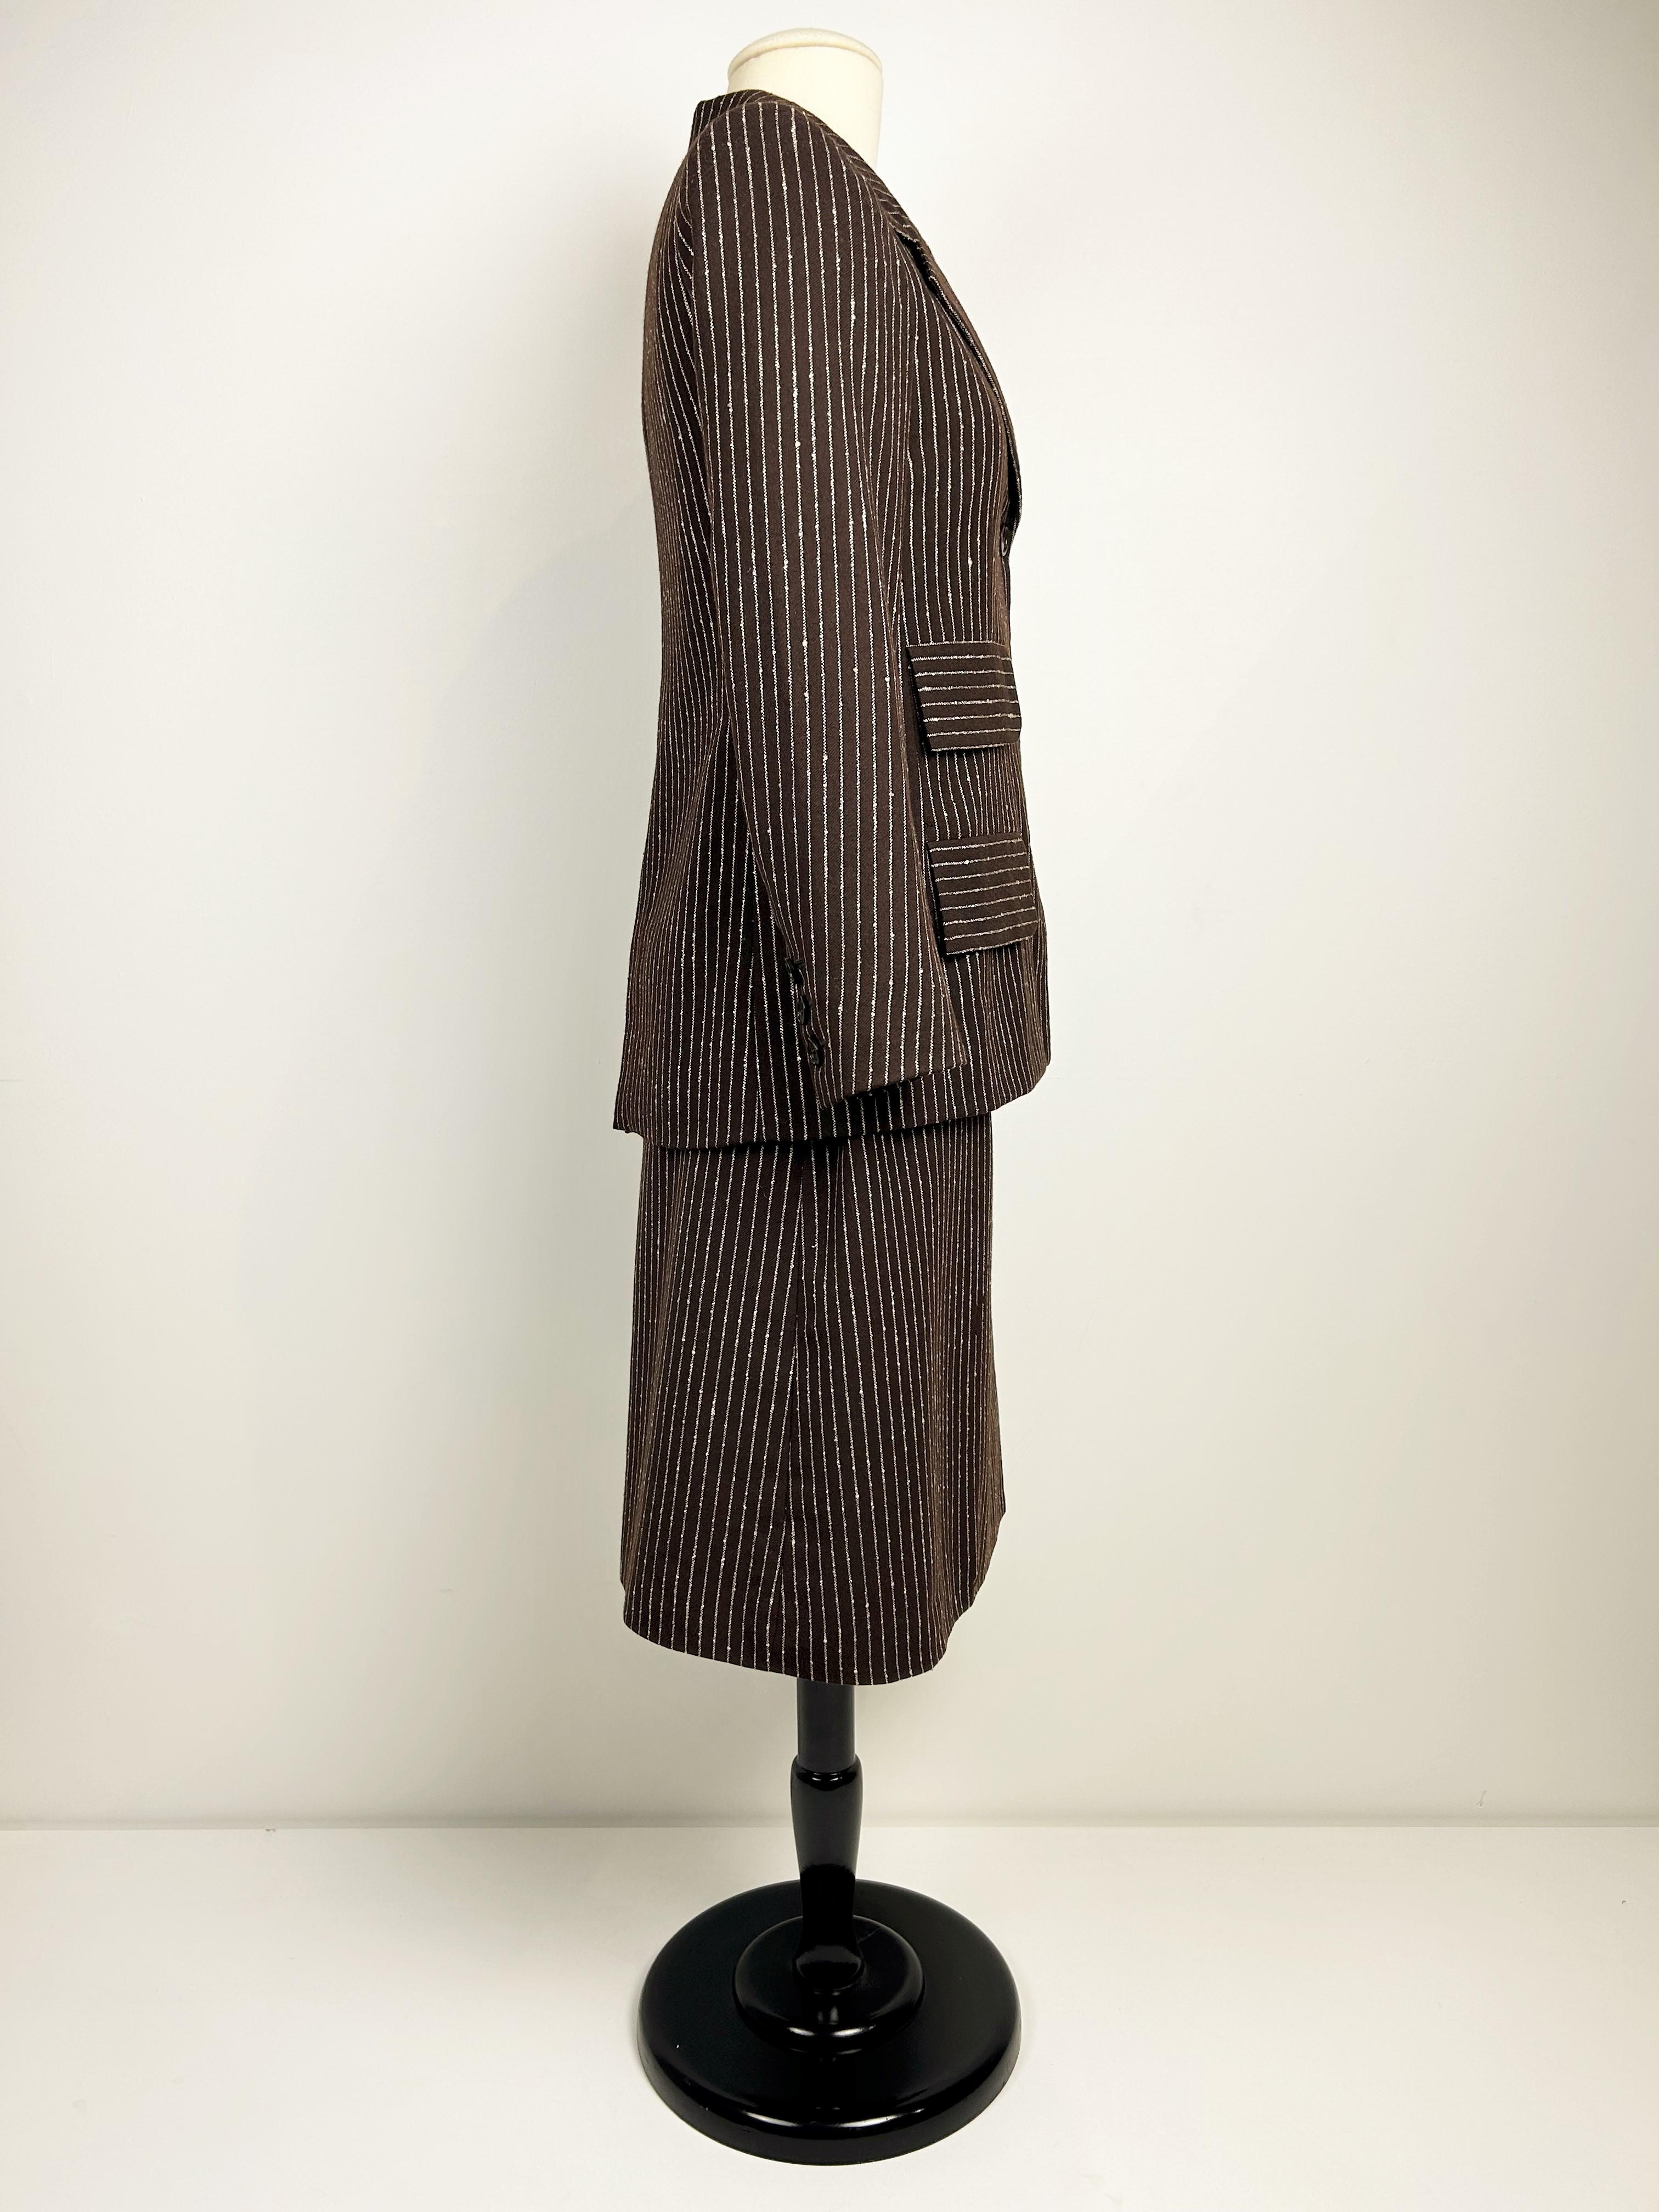 Yves Saint Laurent Haute Couture skirt-suit numbered 14539 Circa 1967/1970 For Sale 9